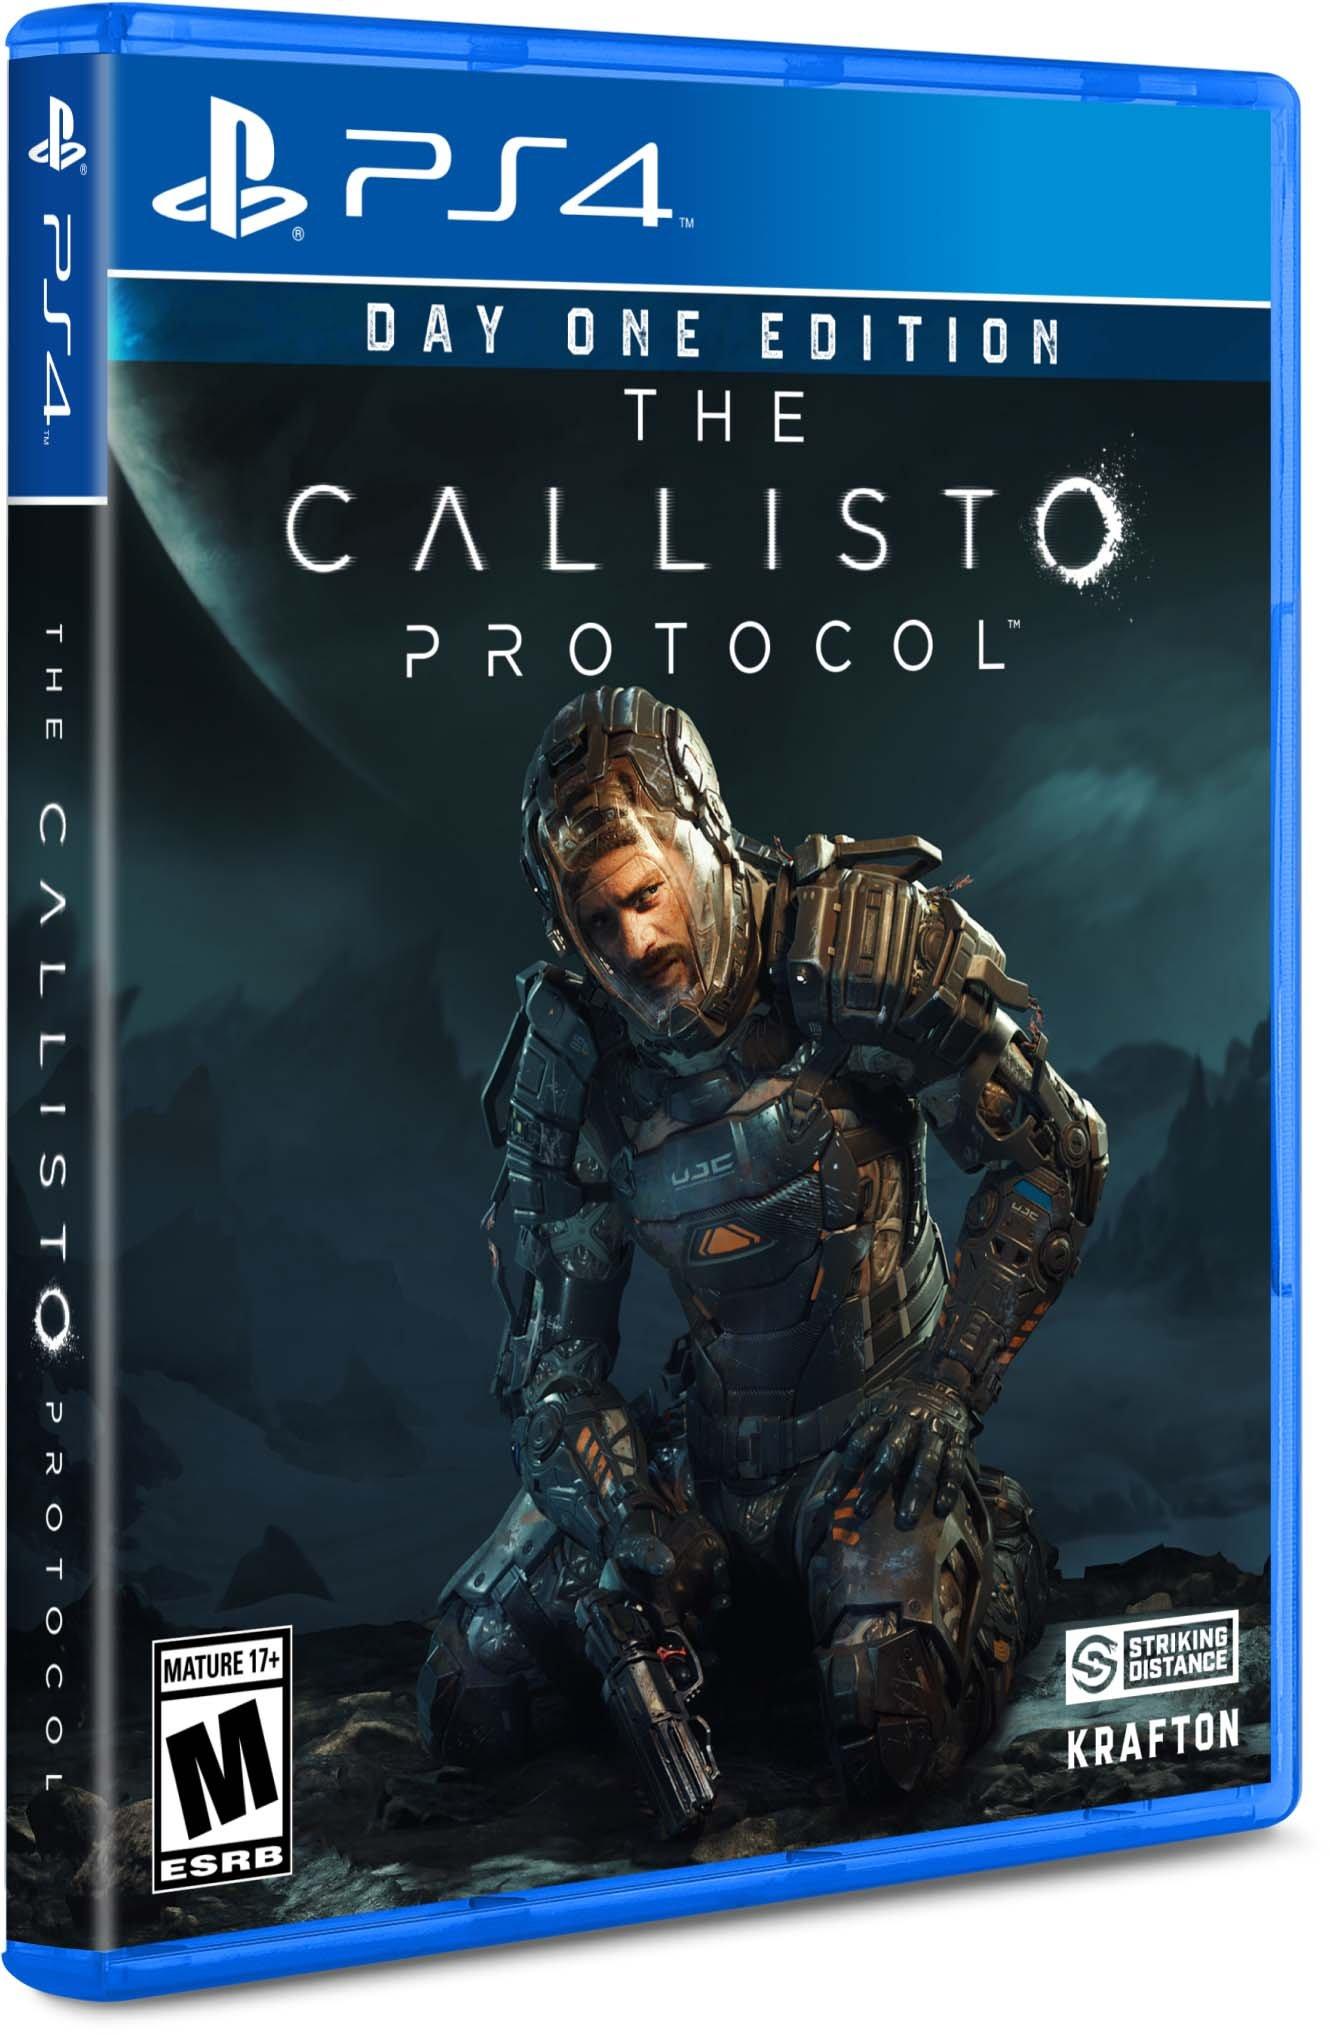 What are your thoughts on the ending of The Callisto Protocol DLC